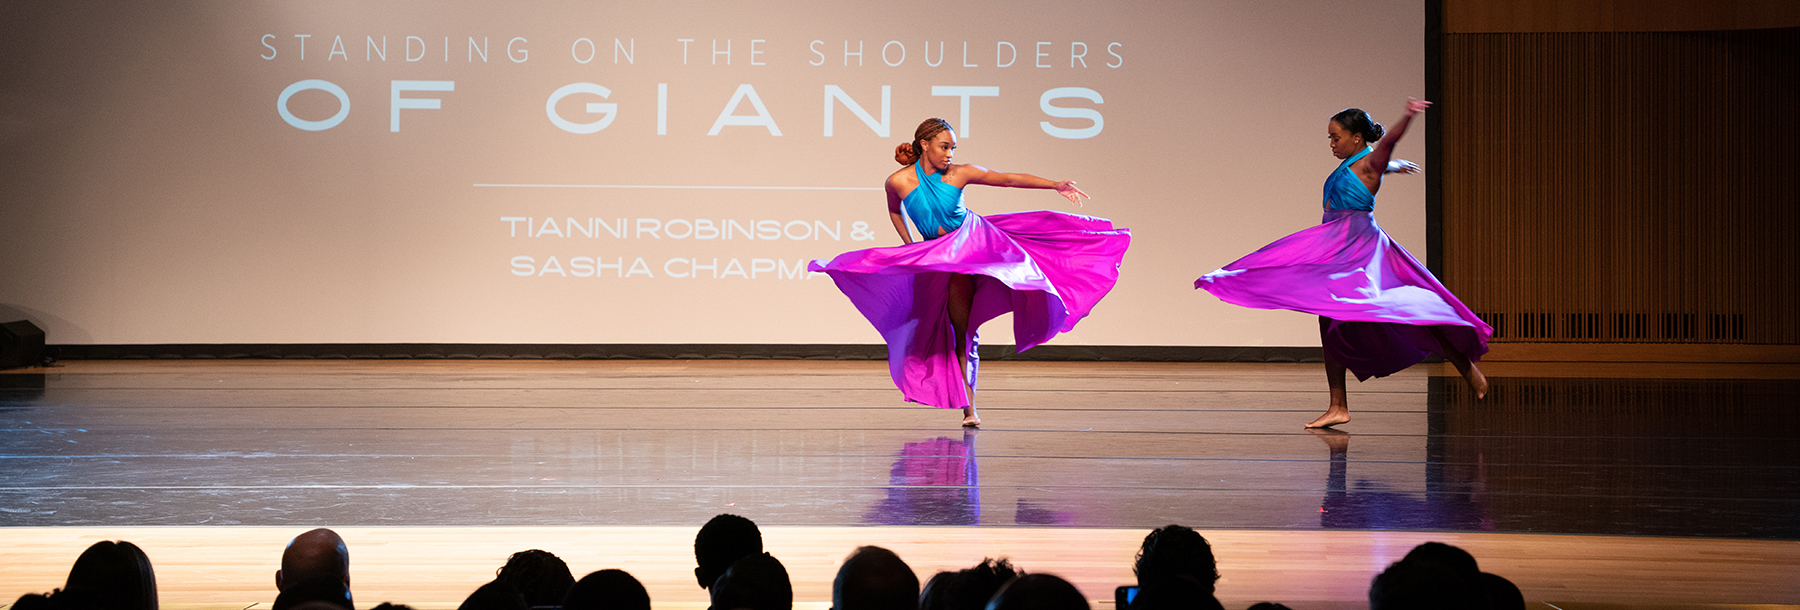 Section Image: Dancers Tianni Robinson and Sasha Chapman perform at the Black Excellence Gala 